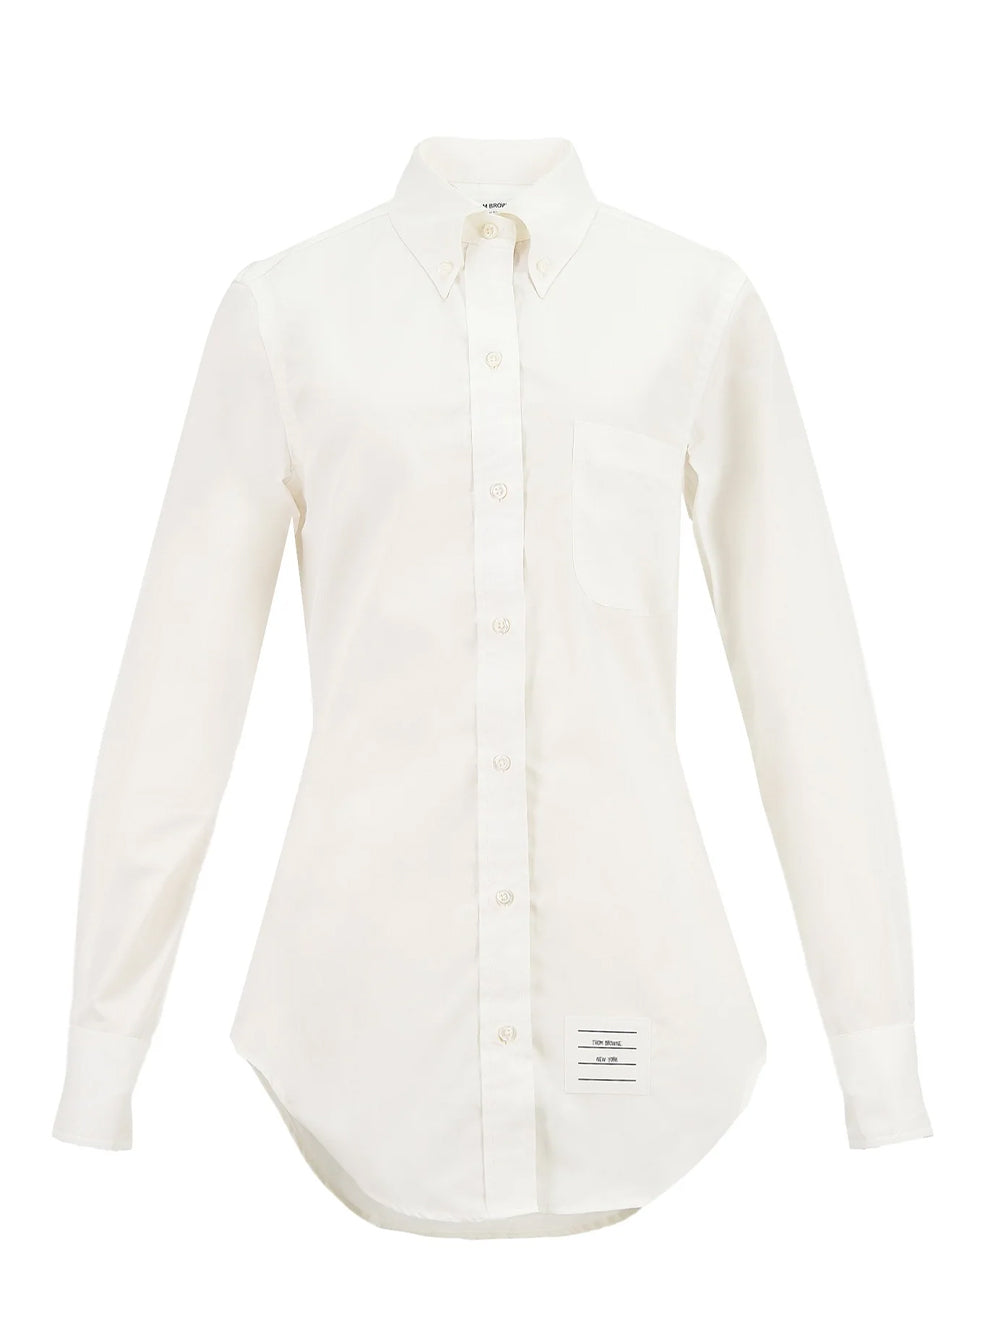 Logo Patch Collared Button-Up Shirt (White)